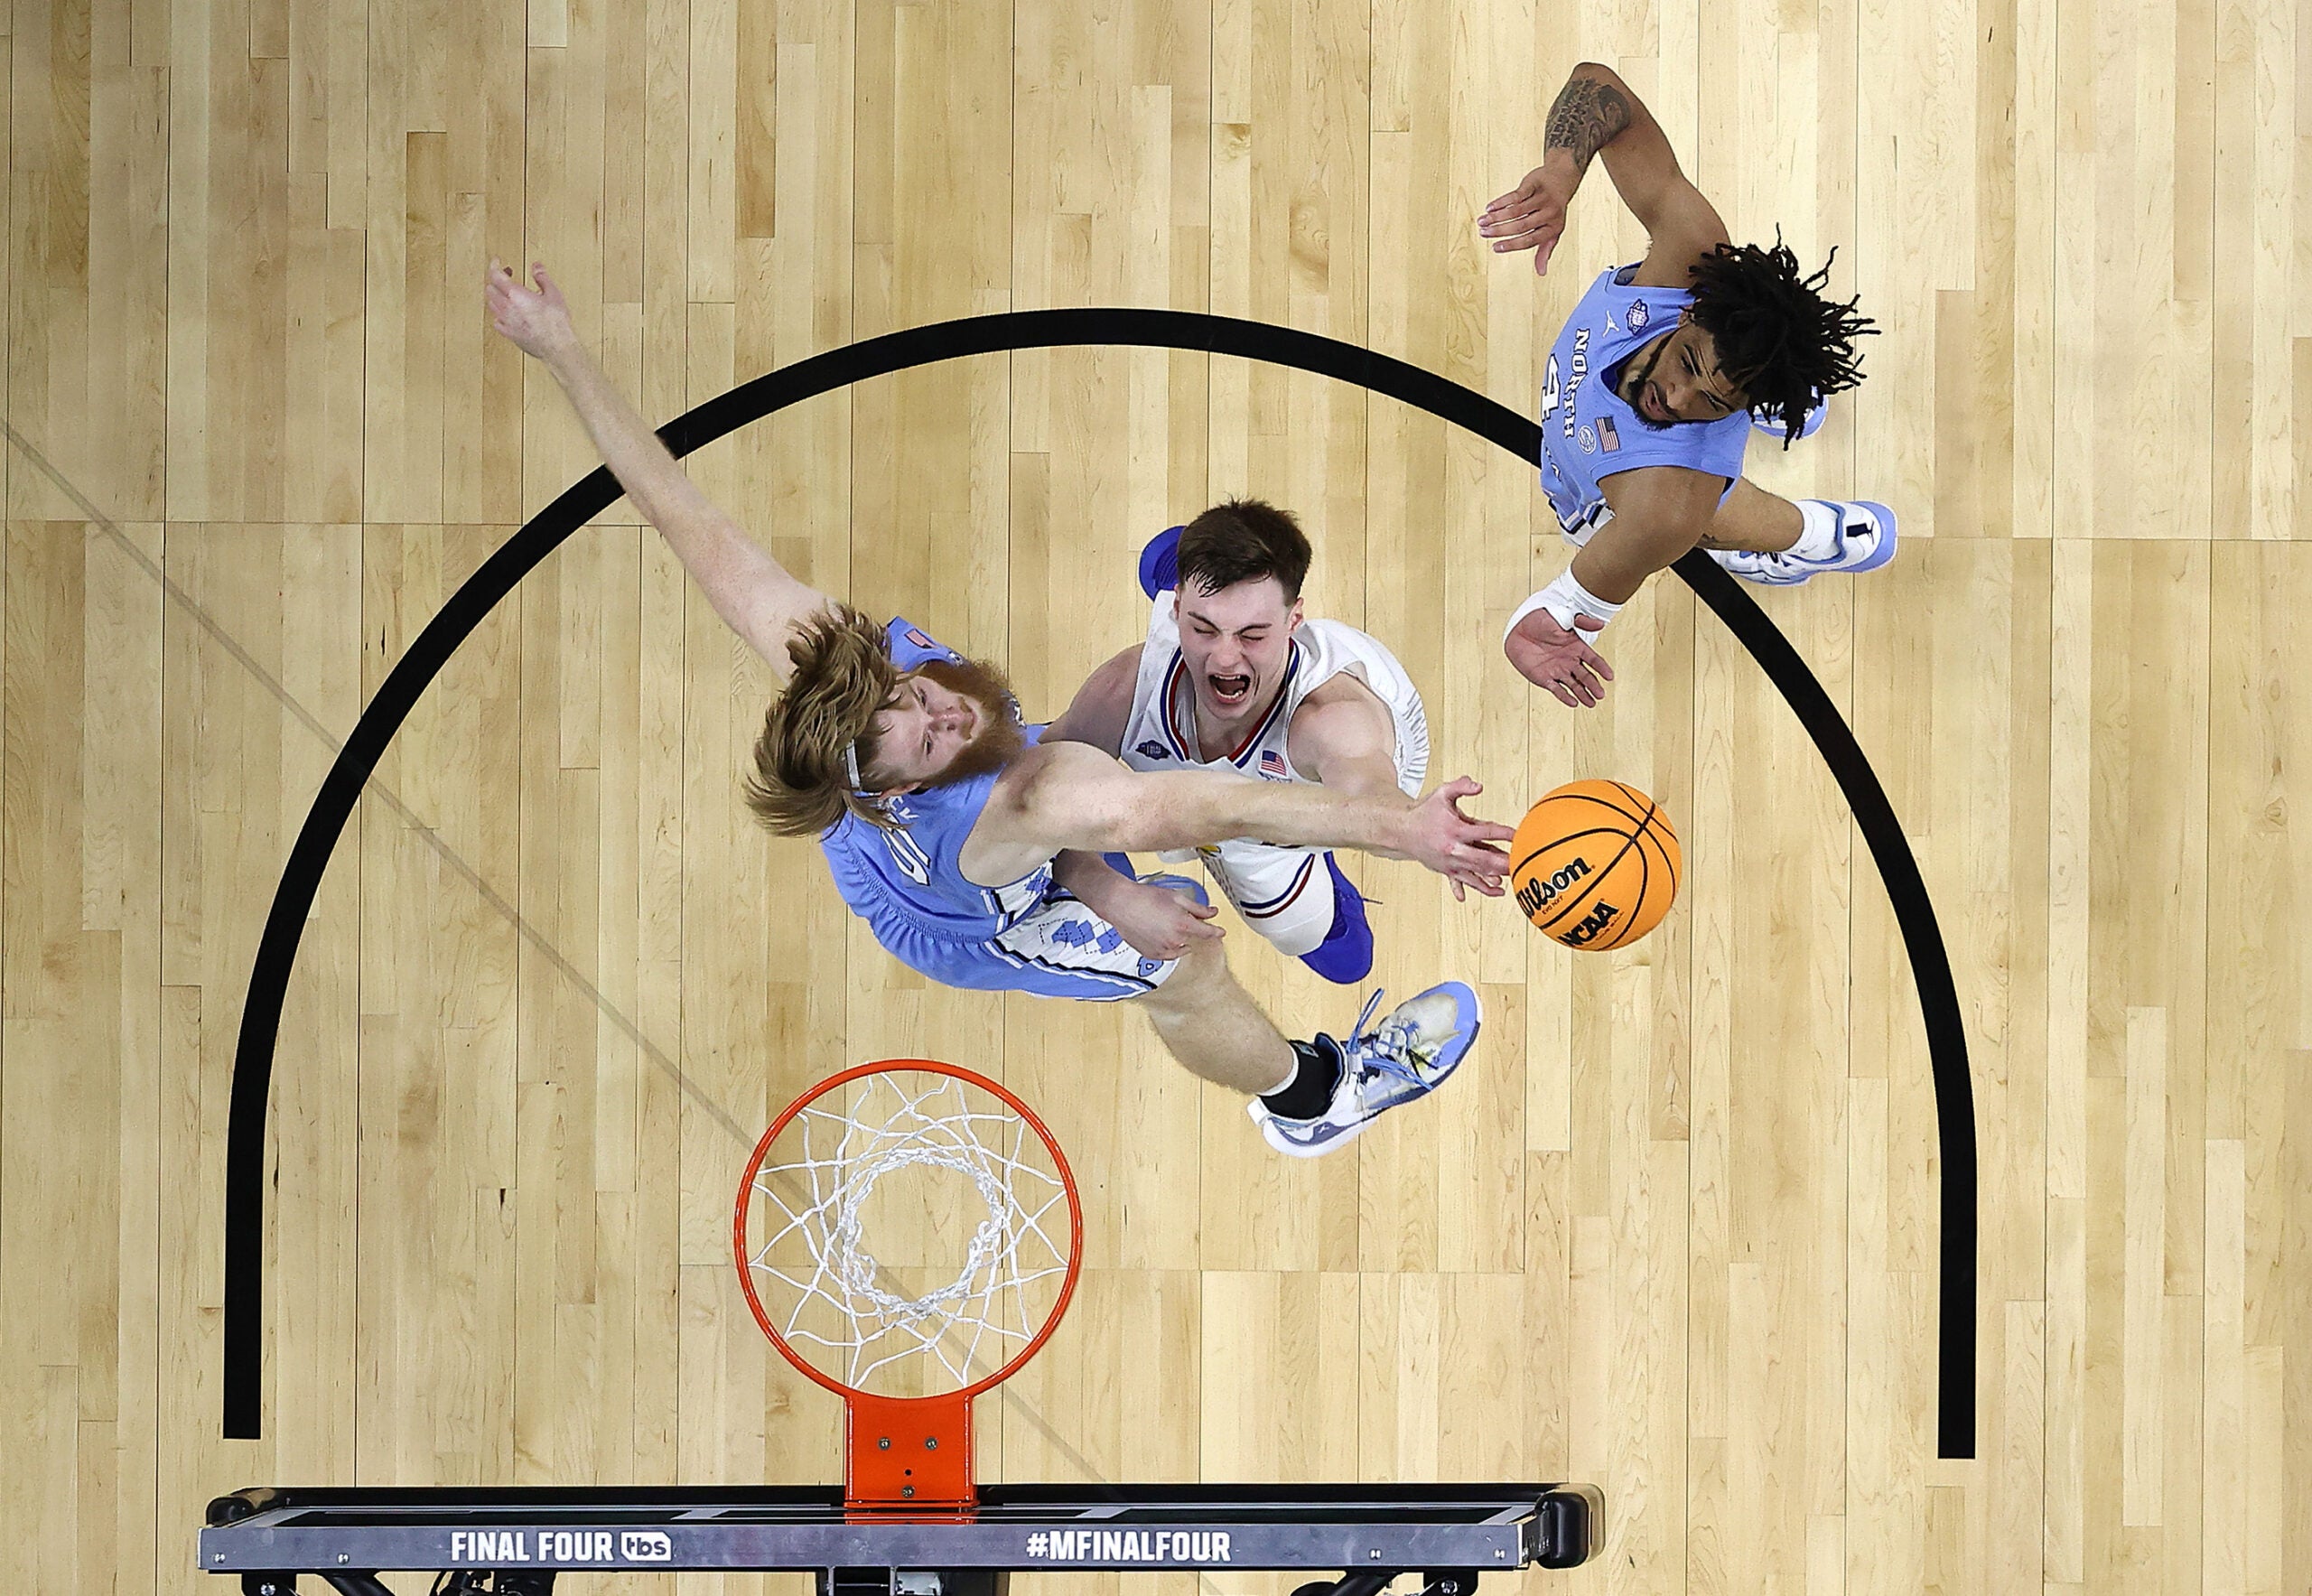 Brady Manek #45 of the North Carolina Tar Heels blocks a shot by Christian Braun #2 of the Kansas Jayhawks in the first half of the game during the 2022 NCAA Men's Basketball Tournament National Championship.